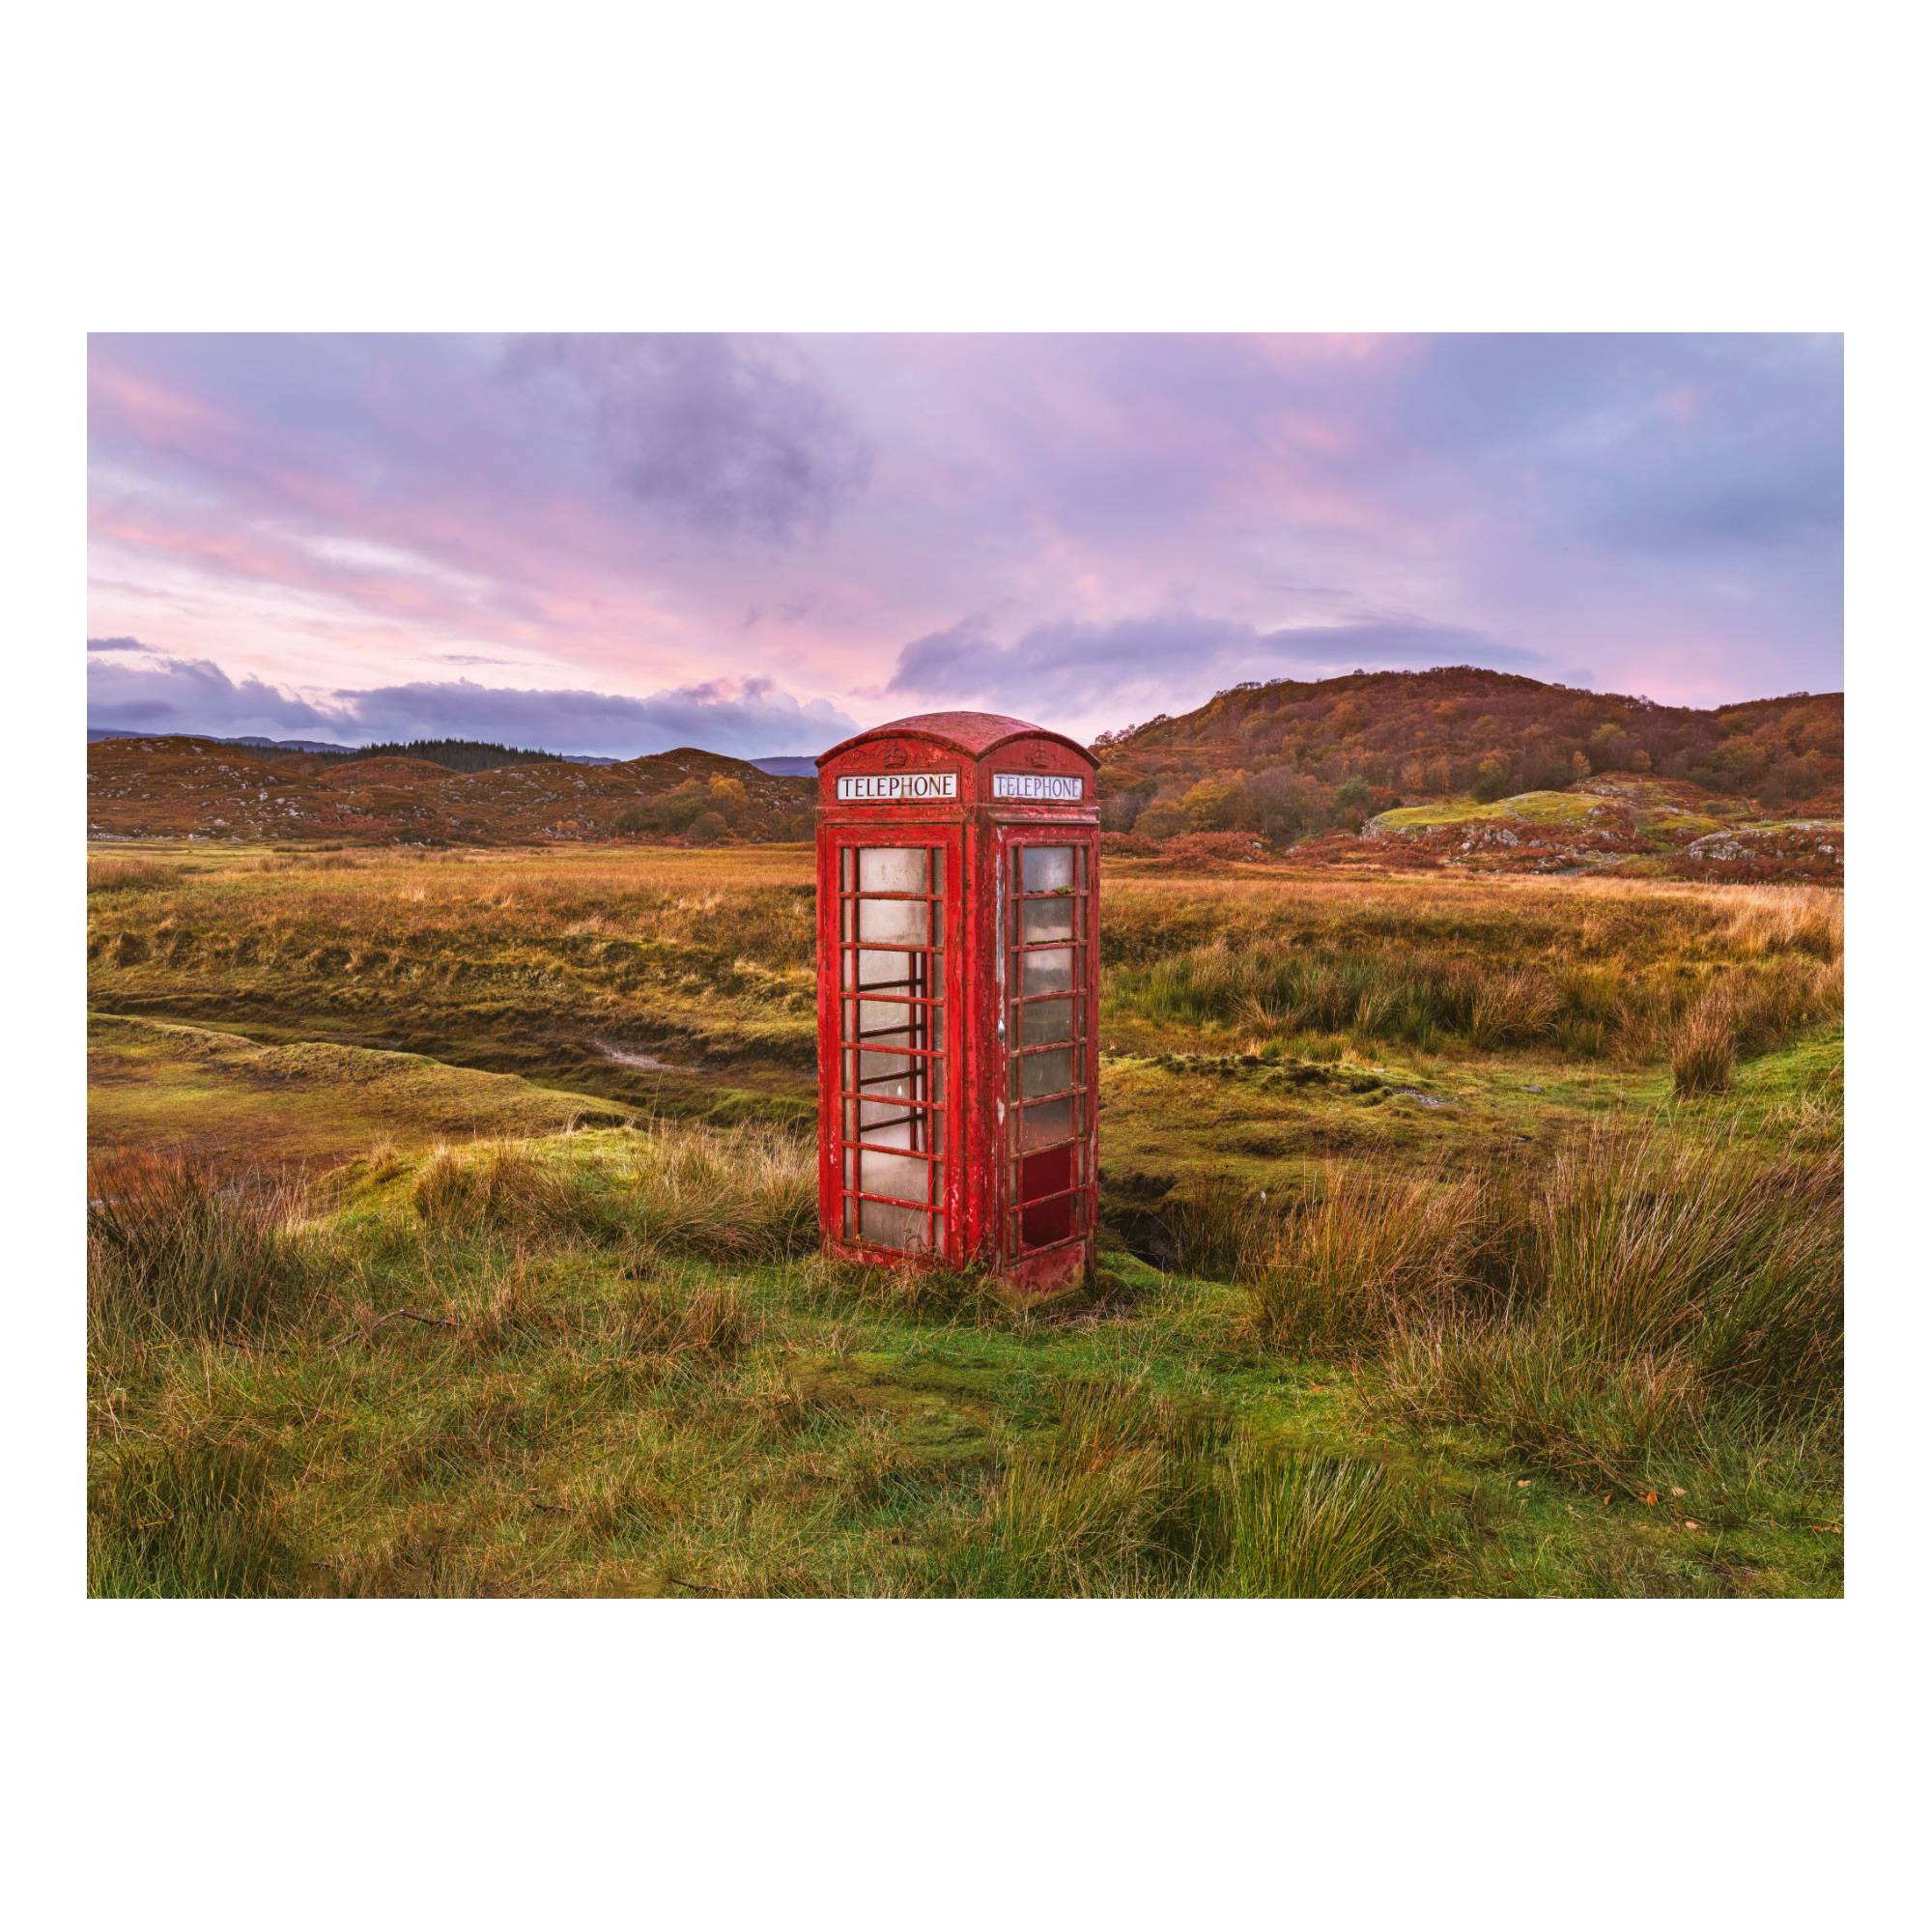 CALLING NOWHERE | Abandoned phone box in the Highlands of Scotland